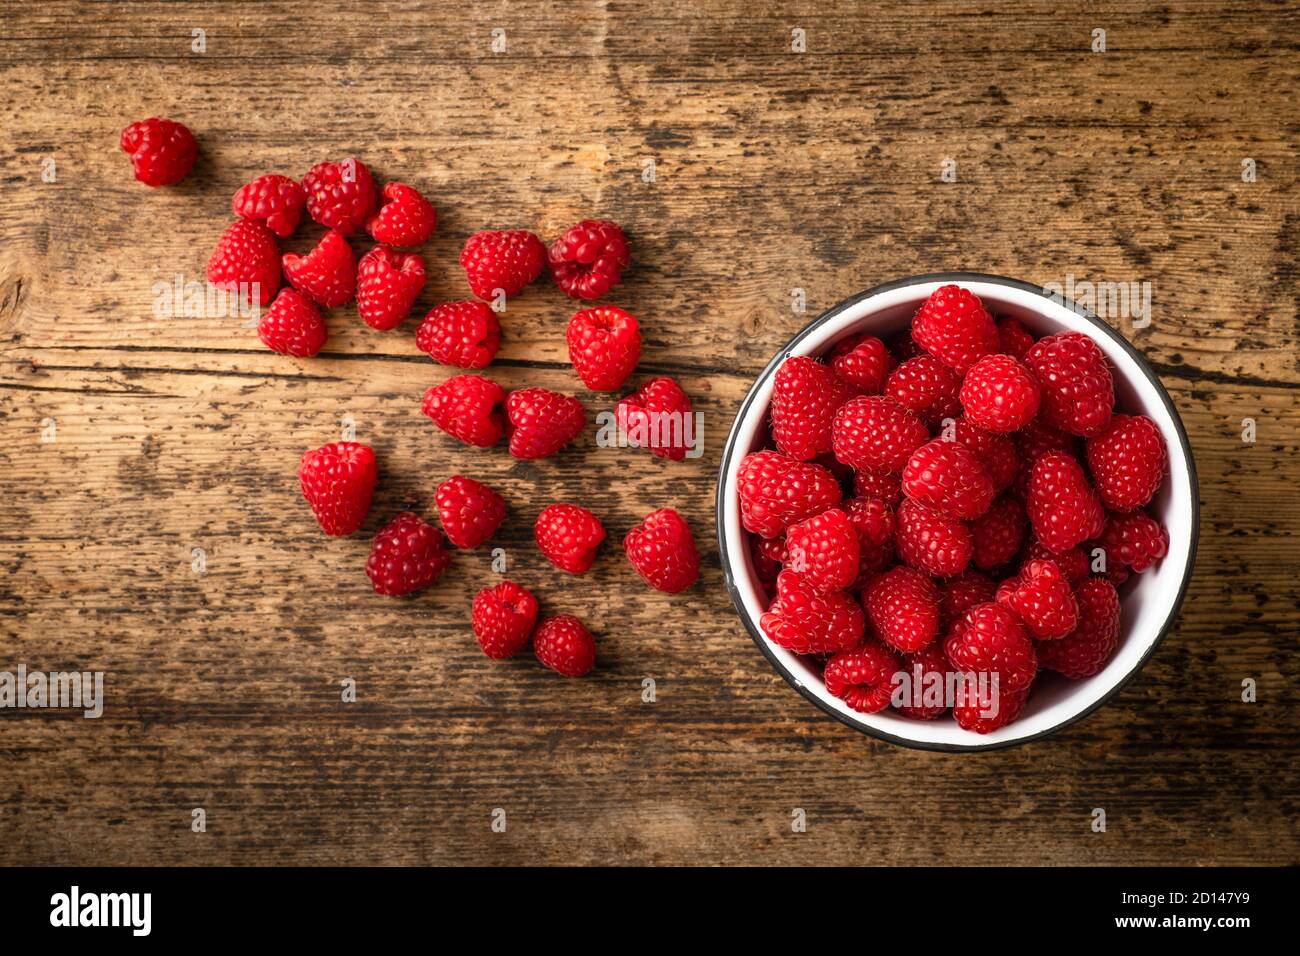 Lots of raspberries in a bowl placed on rustic, wooden background. Berries are placed on the surface outsiden the bowl. Picture is shot from above. Stock Photo